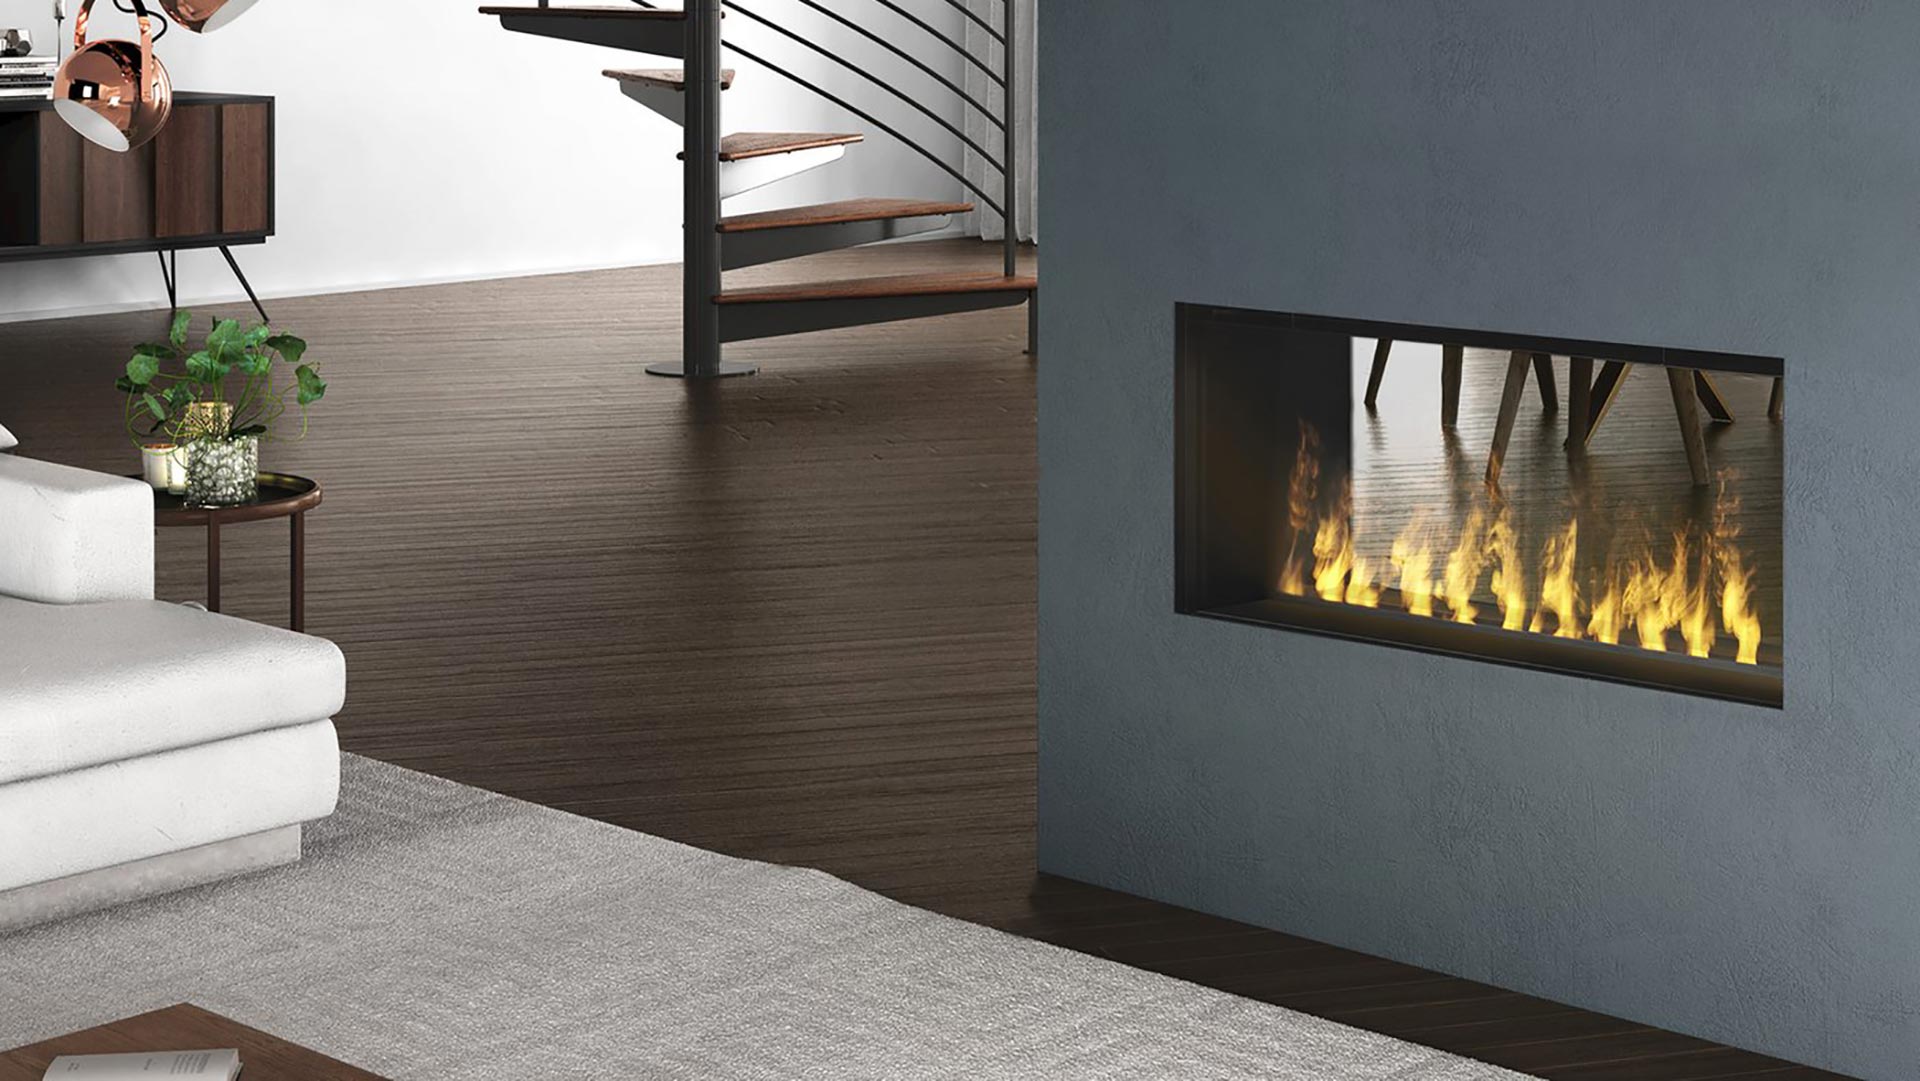 The-Opti-Myst-Pro-1000-Built-In-Firebox-Water-Vapor-Fireplace-by-Dimplex